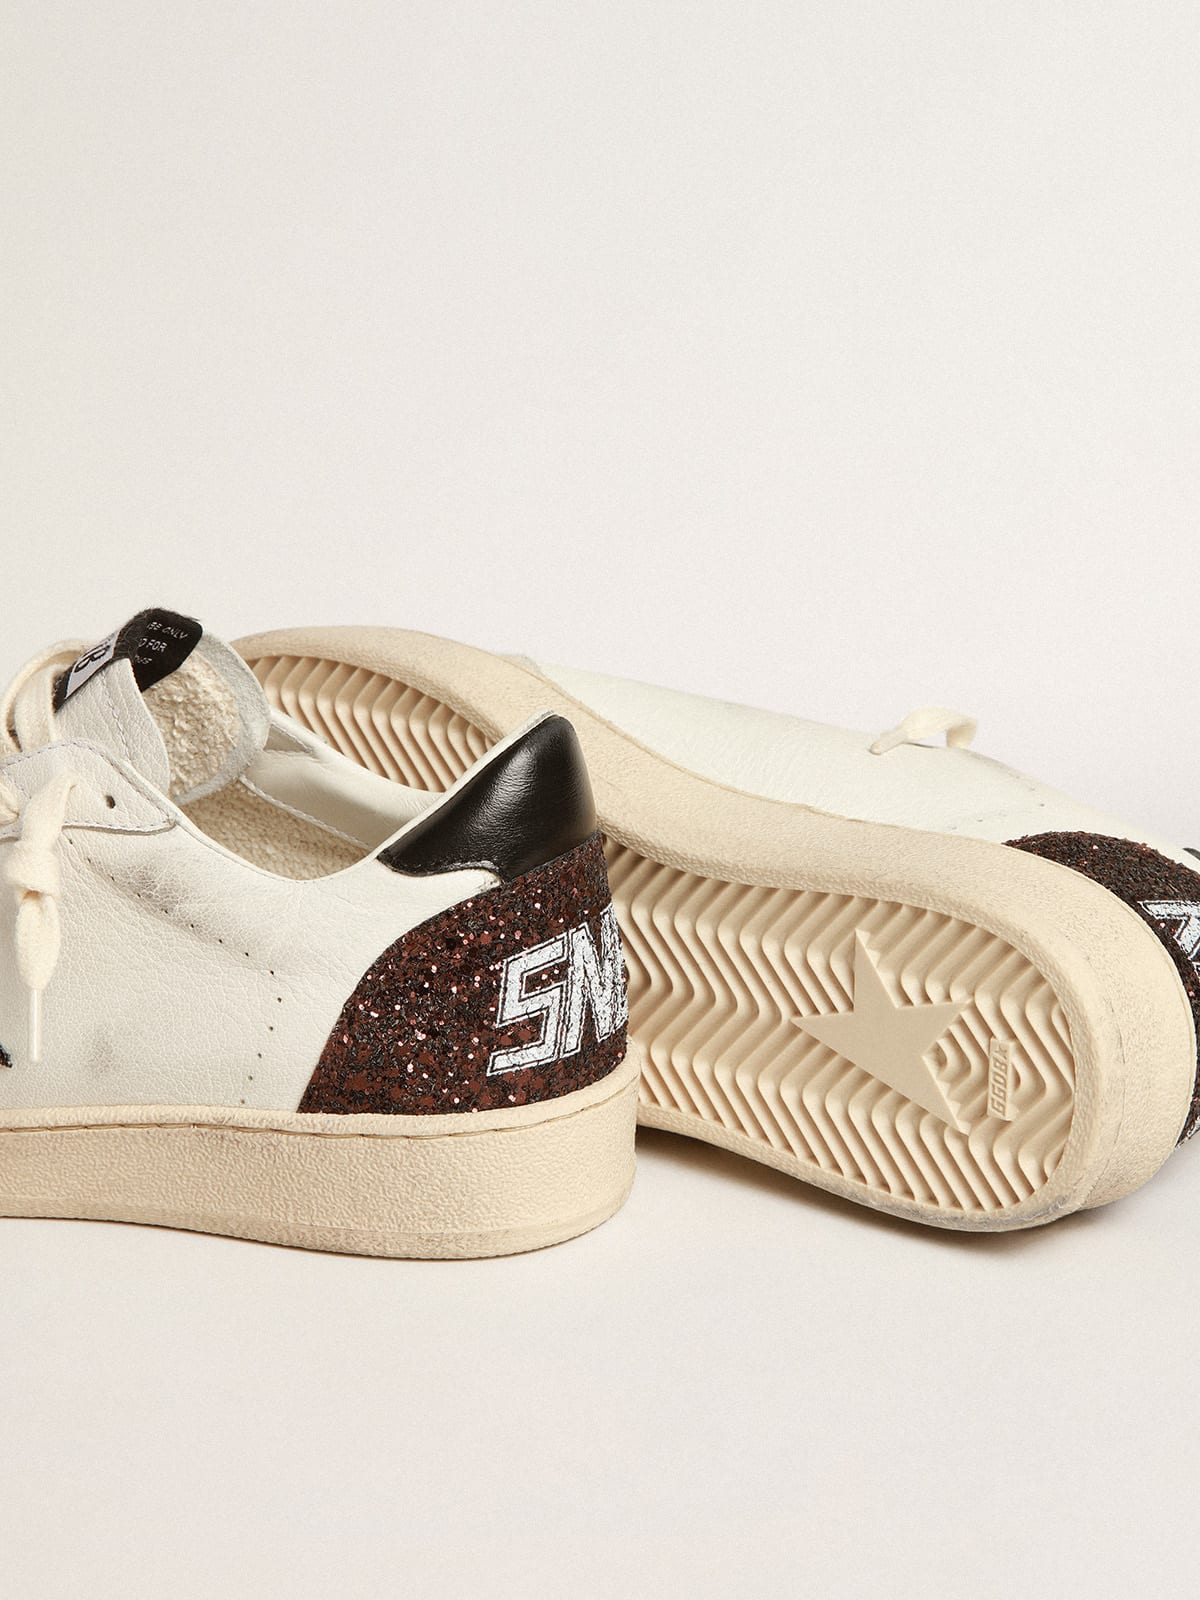 Golden Goose - Ball Star in nappa with glitter star and black nappa heel tab in 